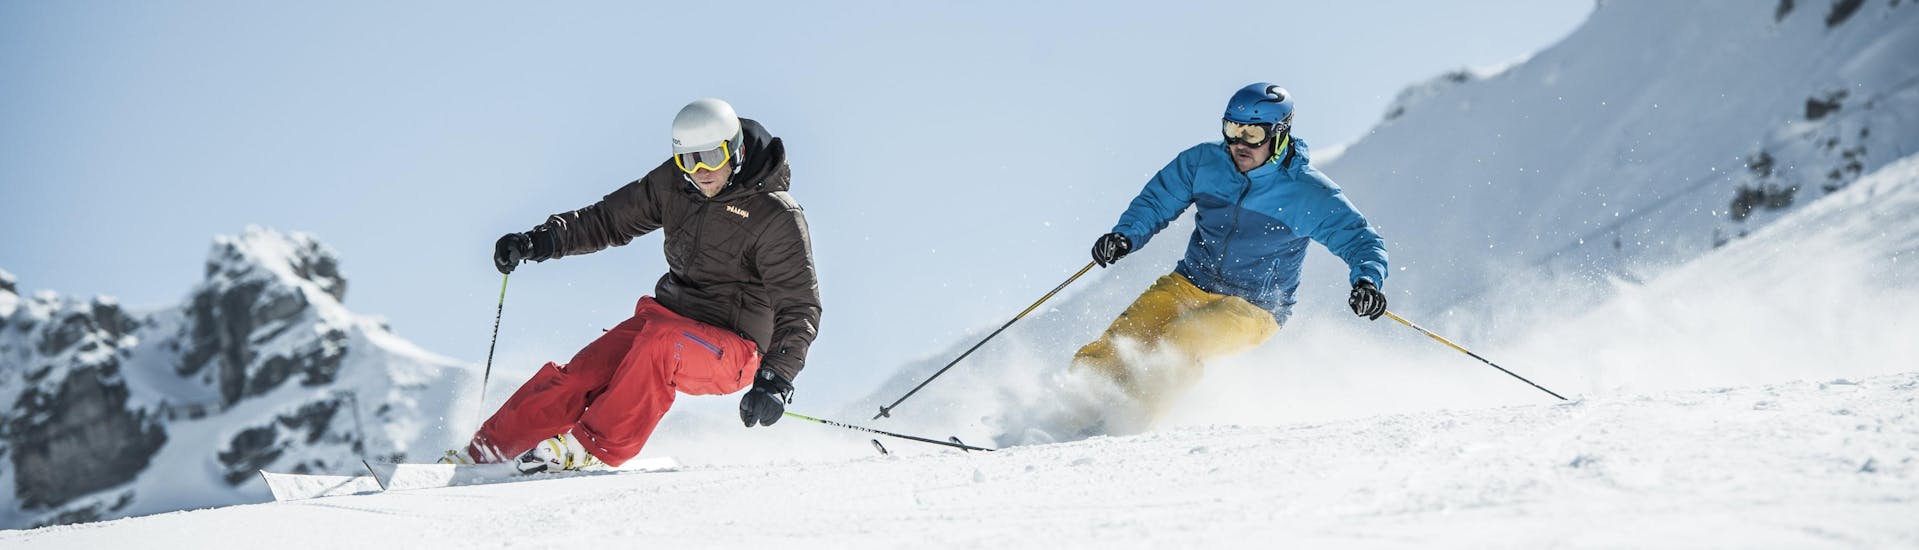 A skier practices the correct skiing technique during one of the private lessons in Friuli.